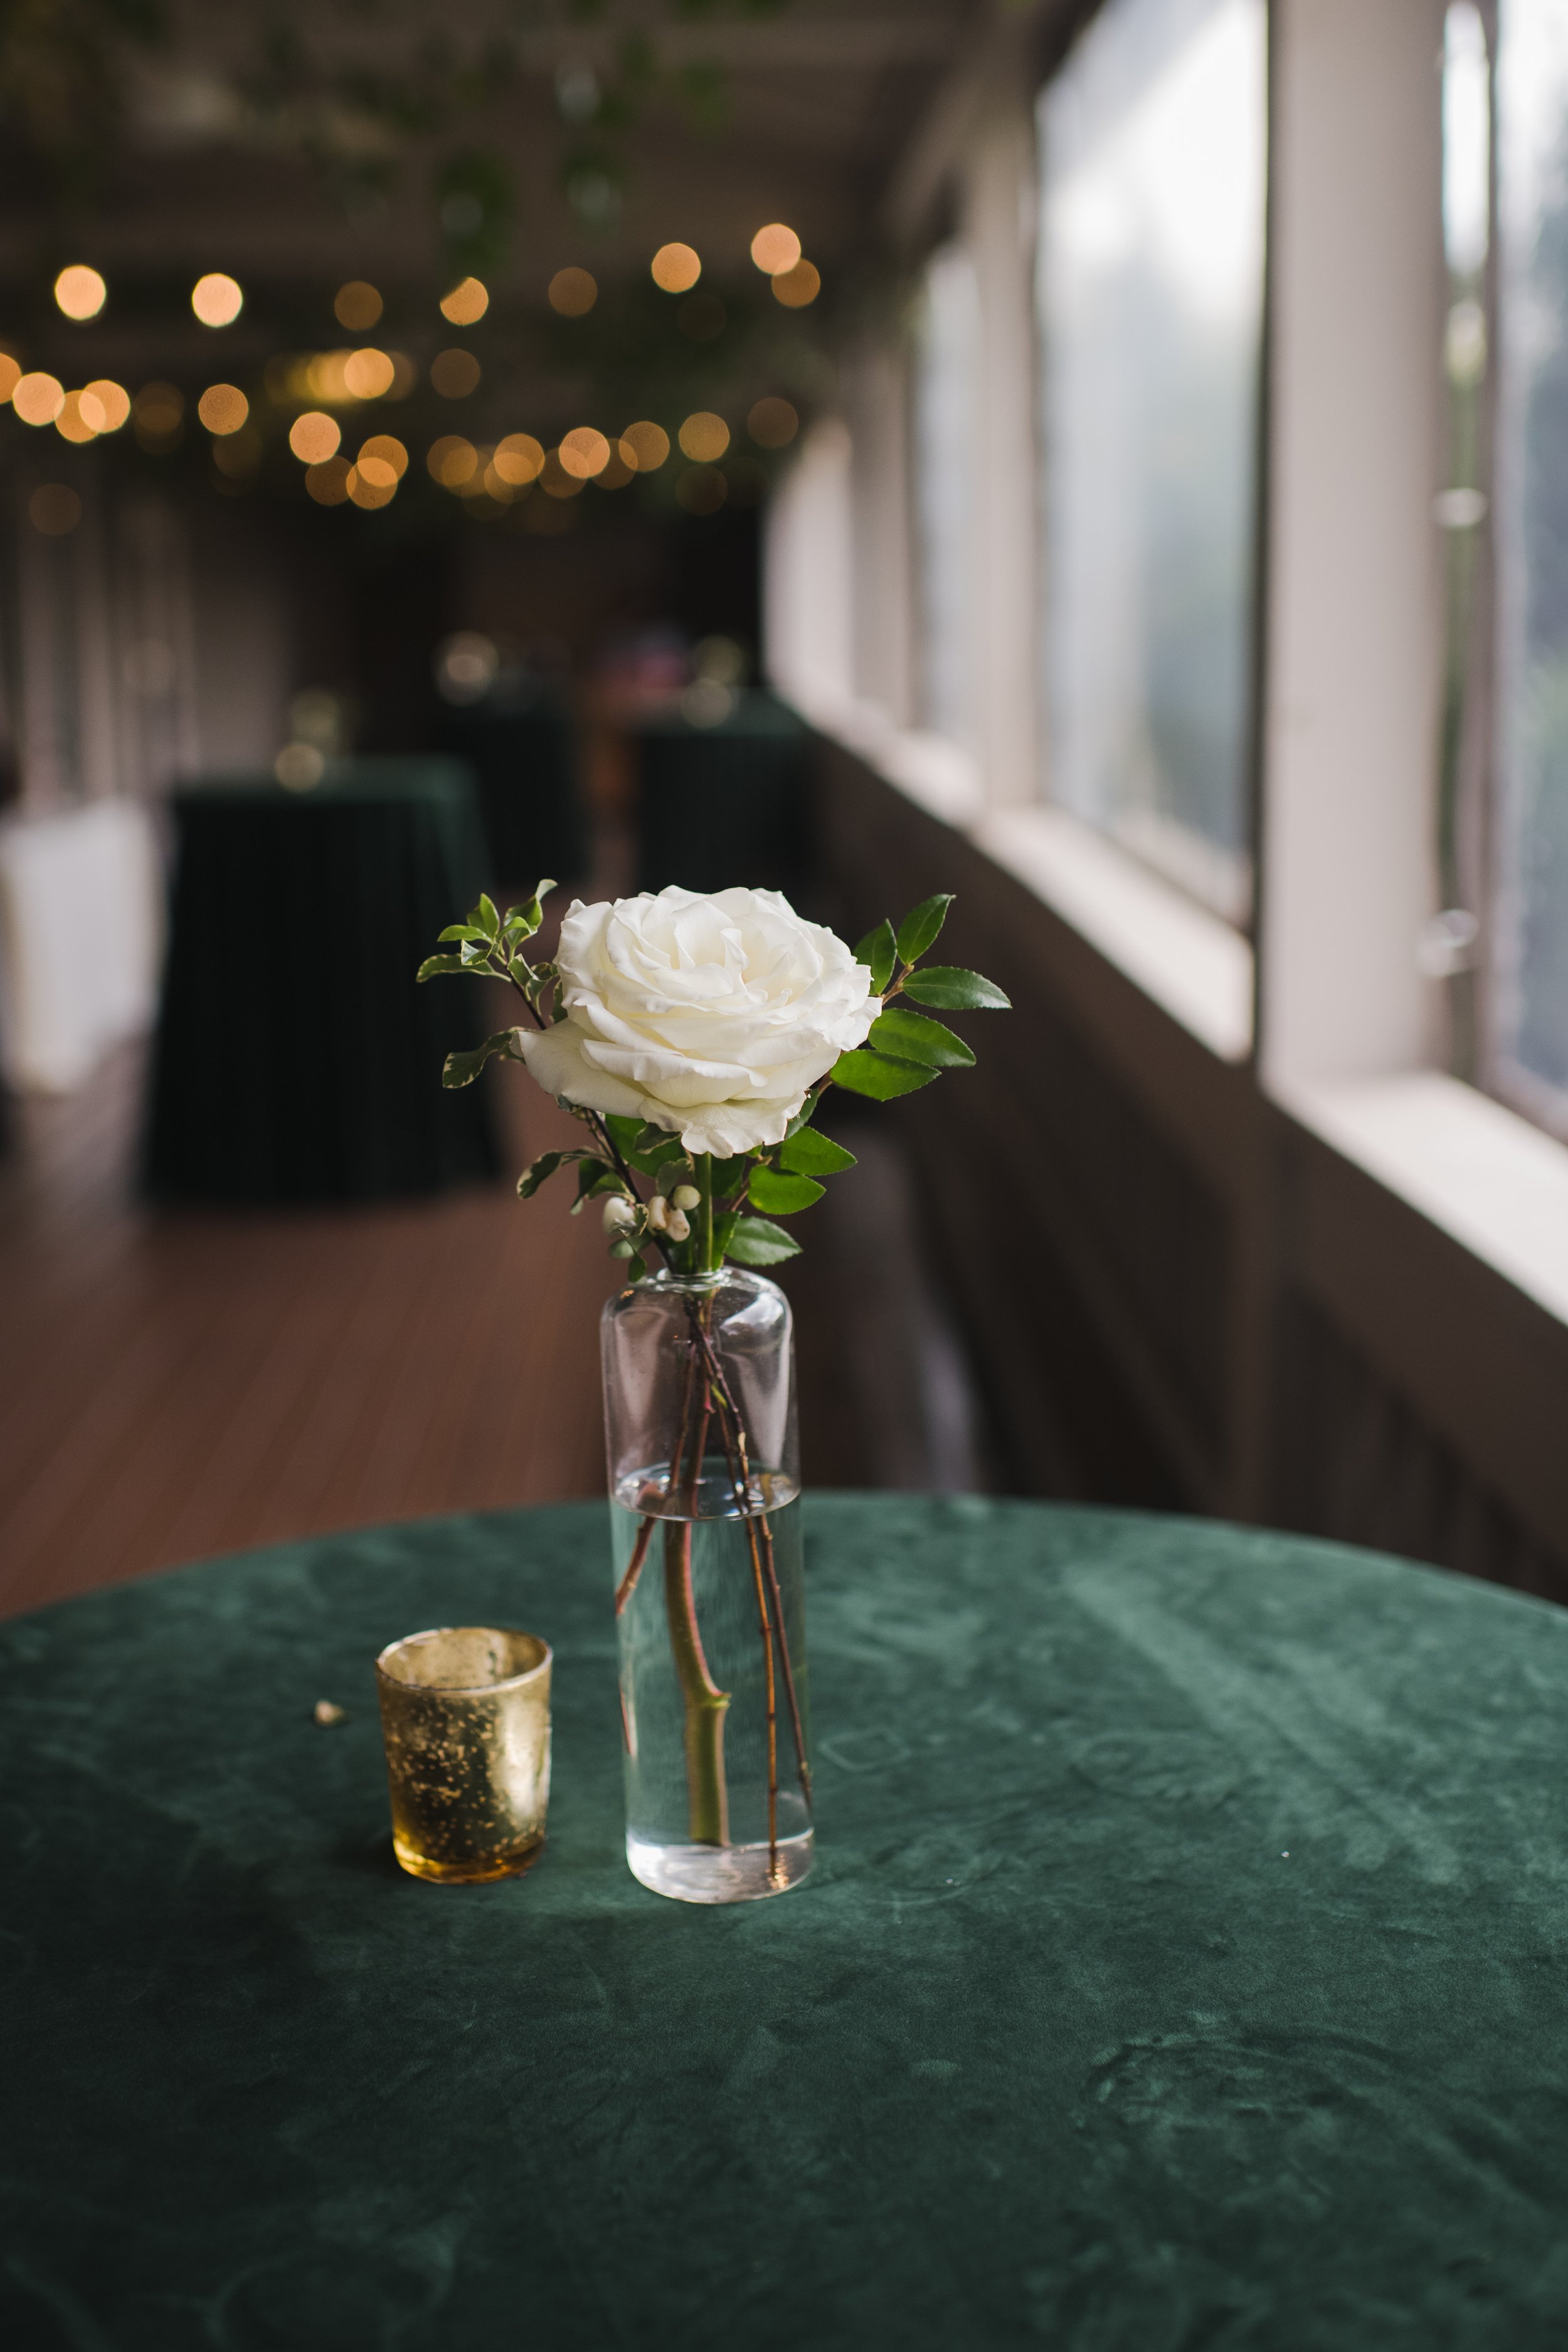 Classic garden-inspired white and greenery wedding flowers. Florals composed of roses, ranunculus, berries, and greenery. Designed by Rosemary and Finch in Nashville, TN.